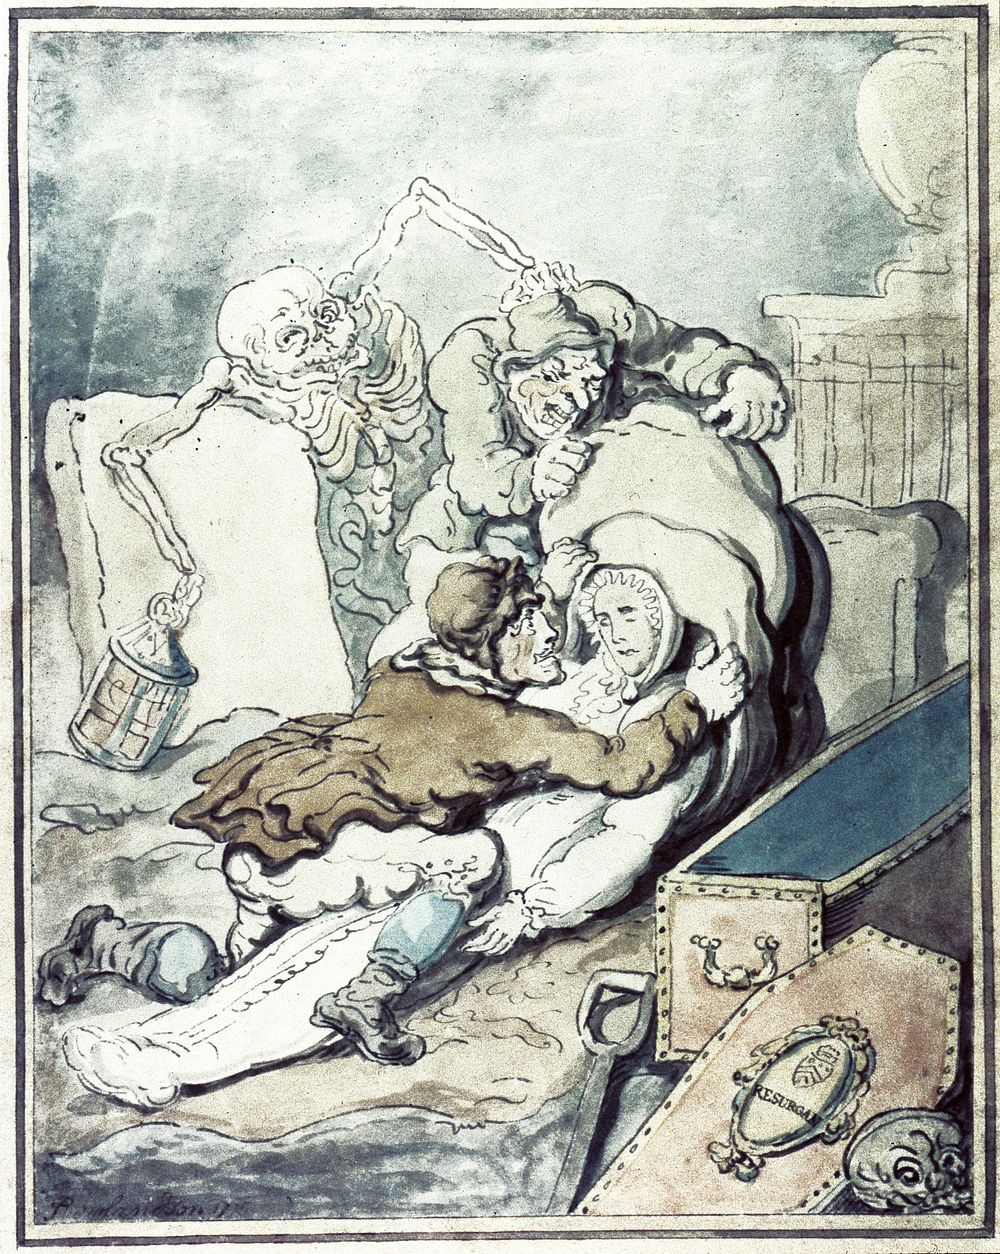 Two men placing the shrouded corpse which they have just disinterred into a sack while Death, as a nightwatchman holding a…